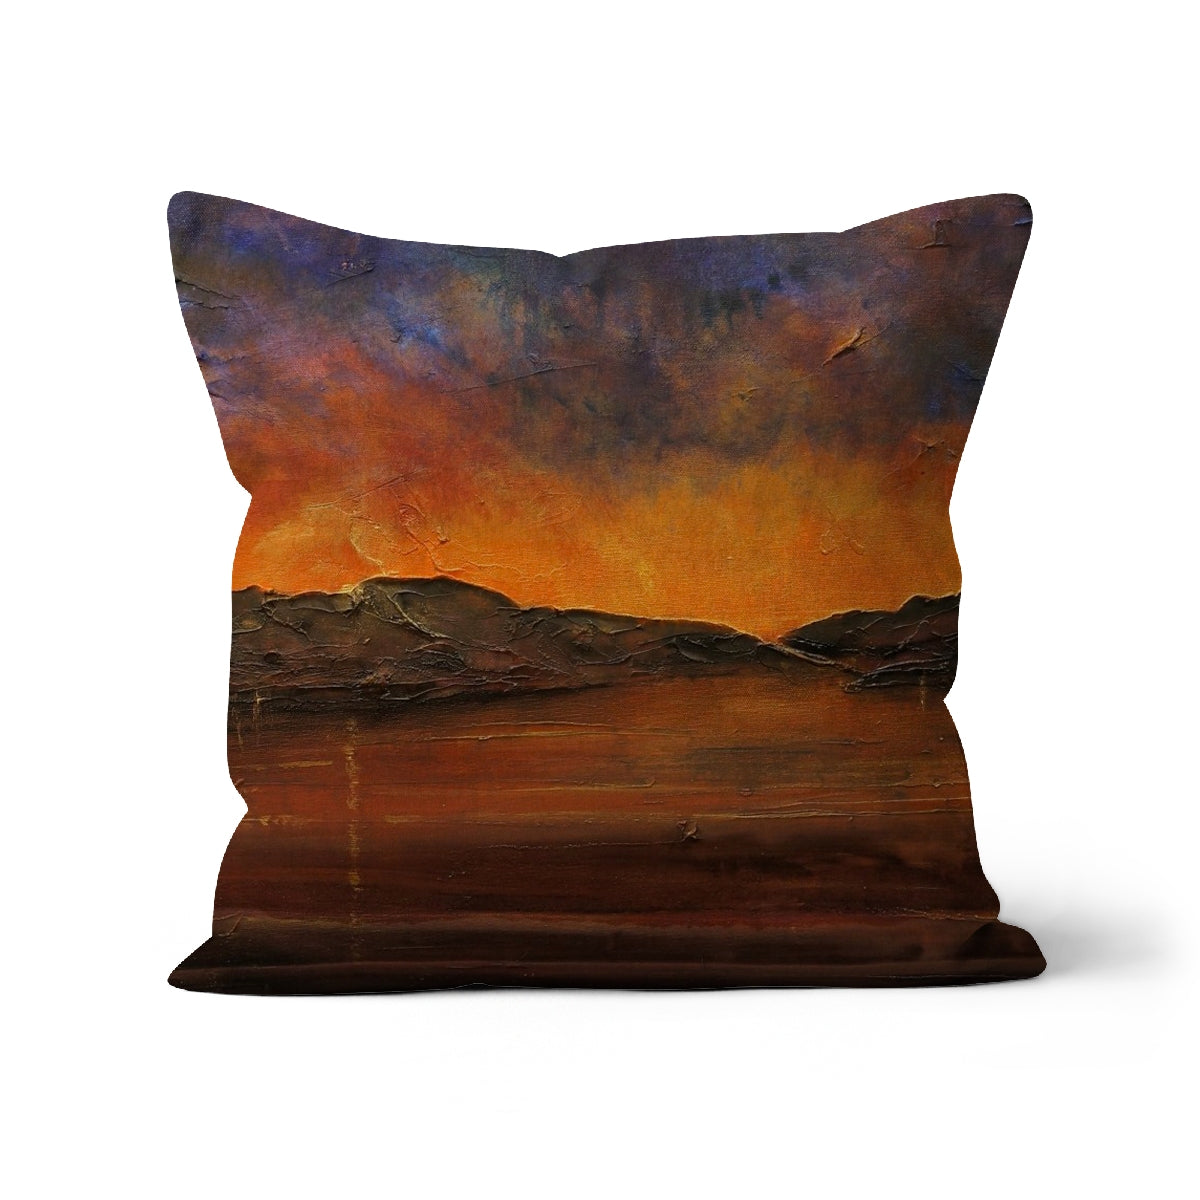 A Brooding Clyde Dusk Art Gifts Cushion-Cushions-River Clyde Art Gallery-Linen-22"x22"-Paintings, Prints, Homeware, Art Gifts From Scotland By Scottish Artist Kevin Hunter